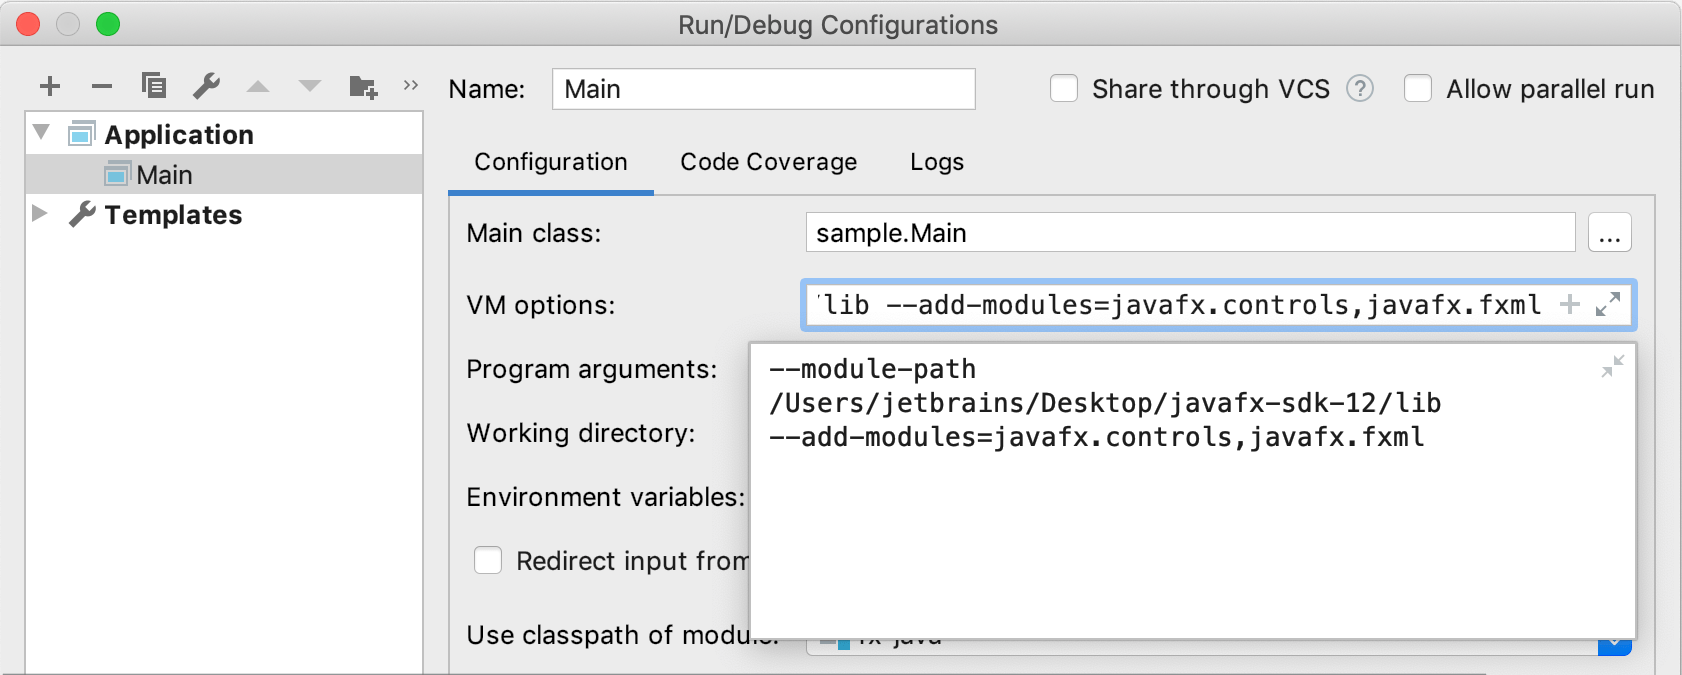 Specifying VM options for JavaFX